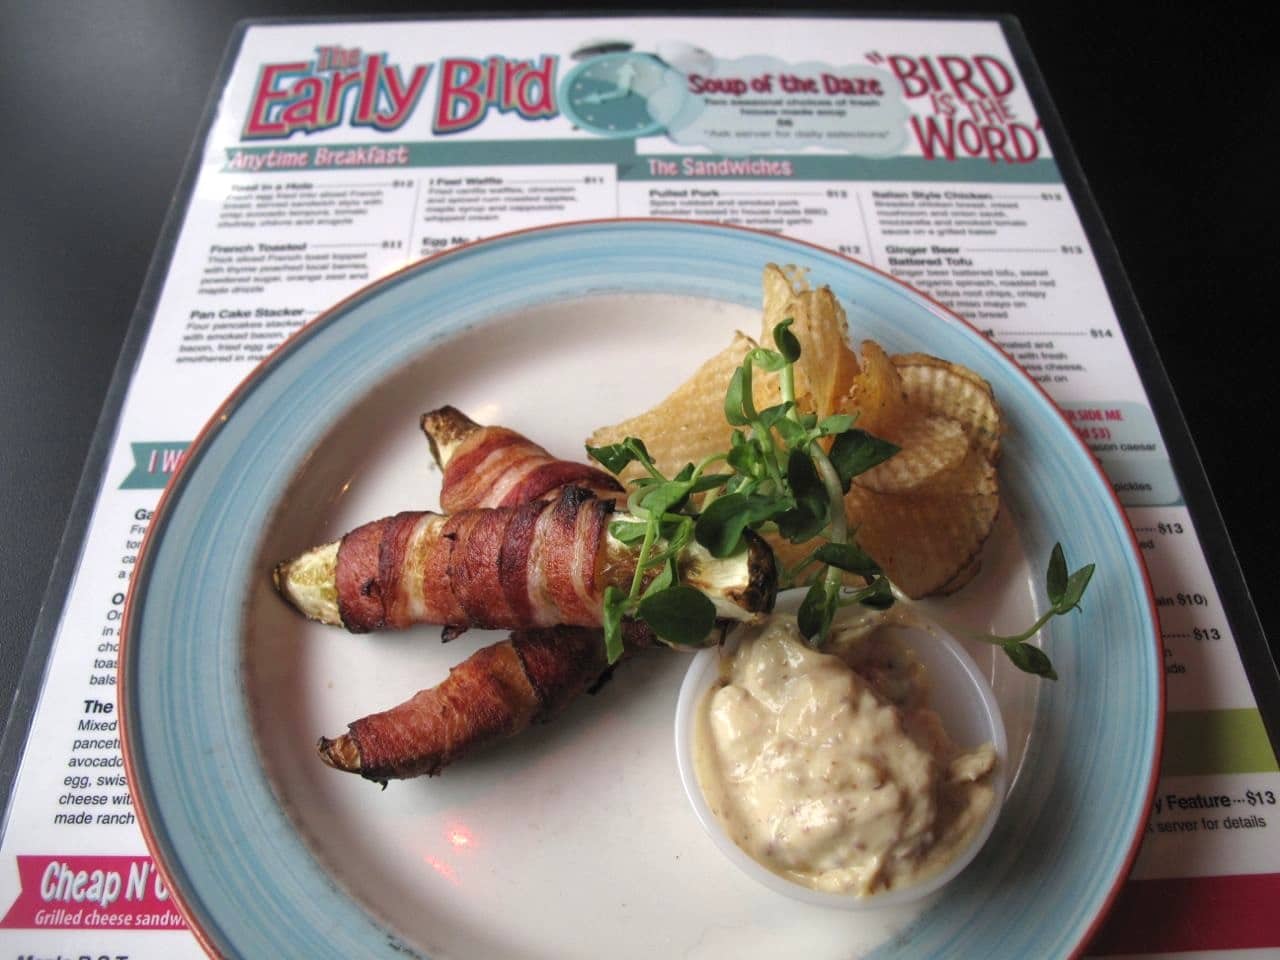 Bacon Fried Pickles at The Early Bird London.